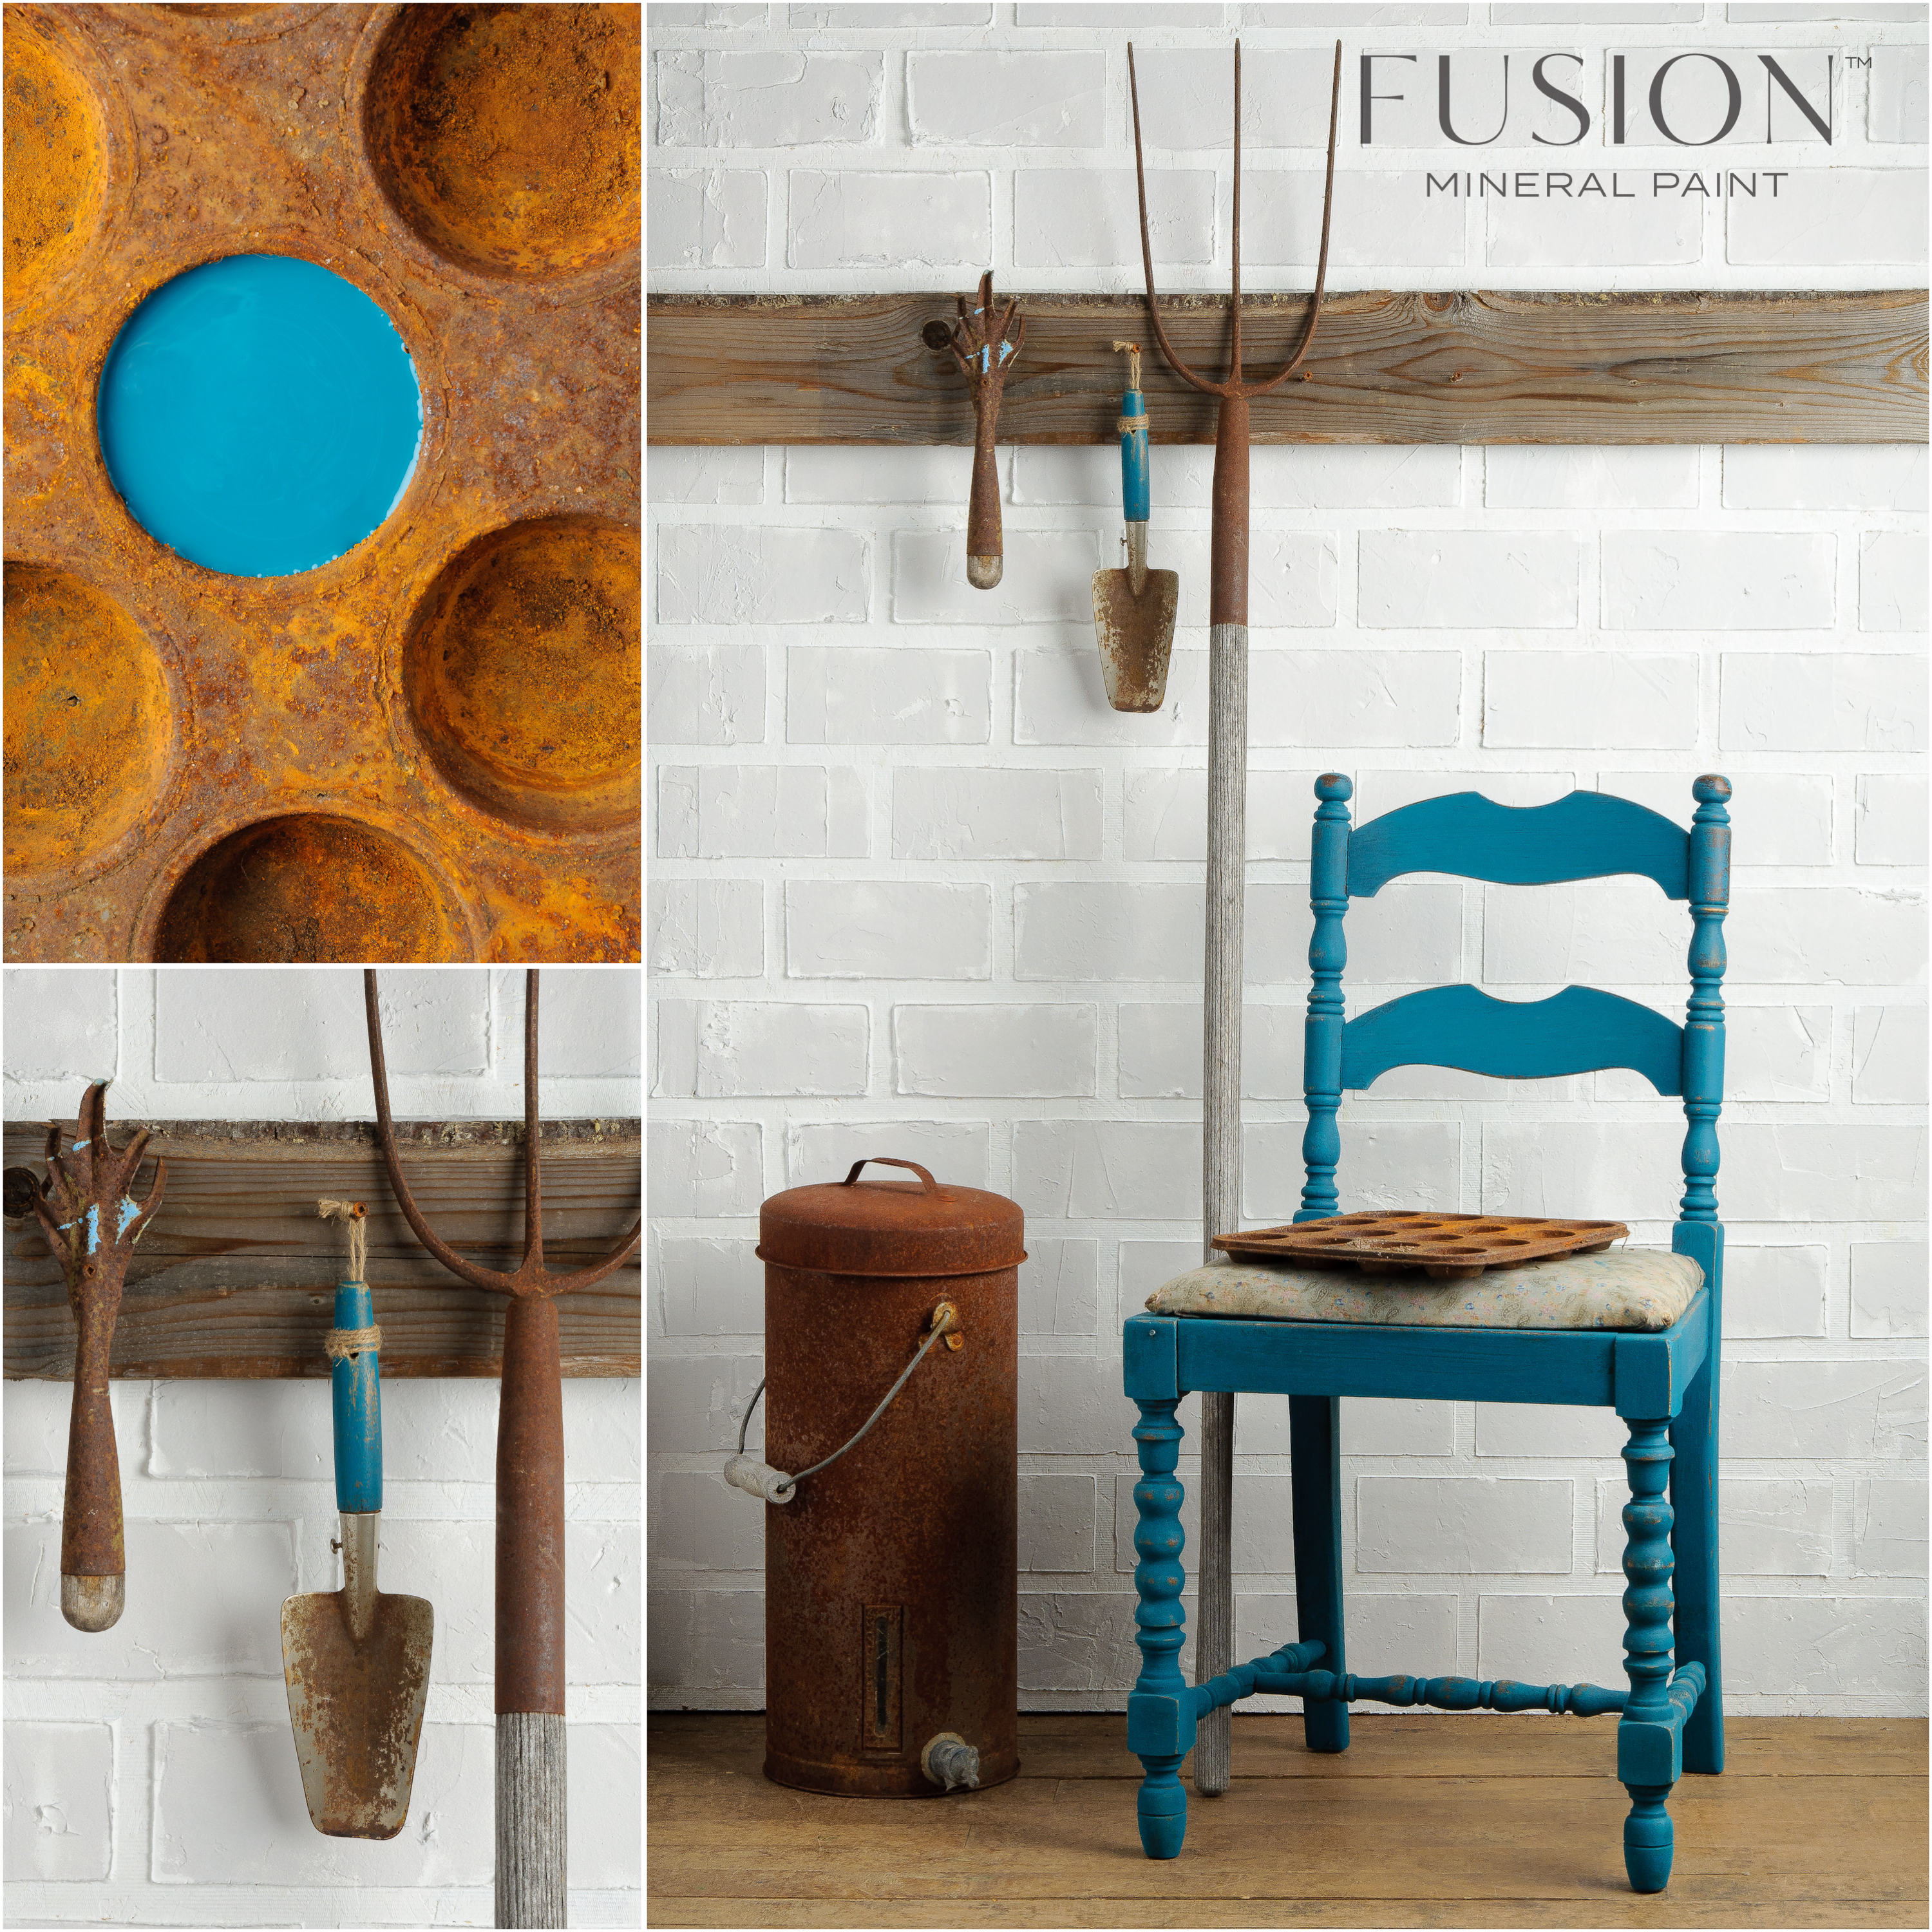 Renfrew Blue Fusion Mineral Paint Goed Gestyled Brielle